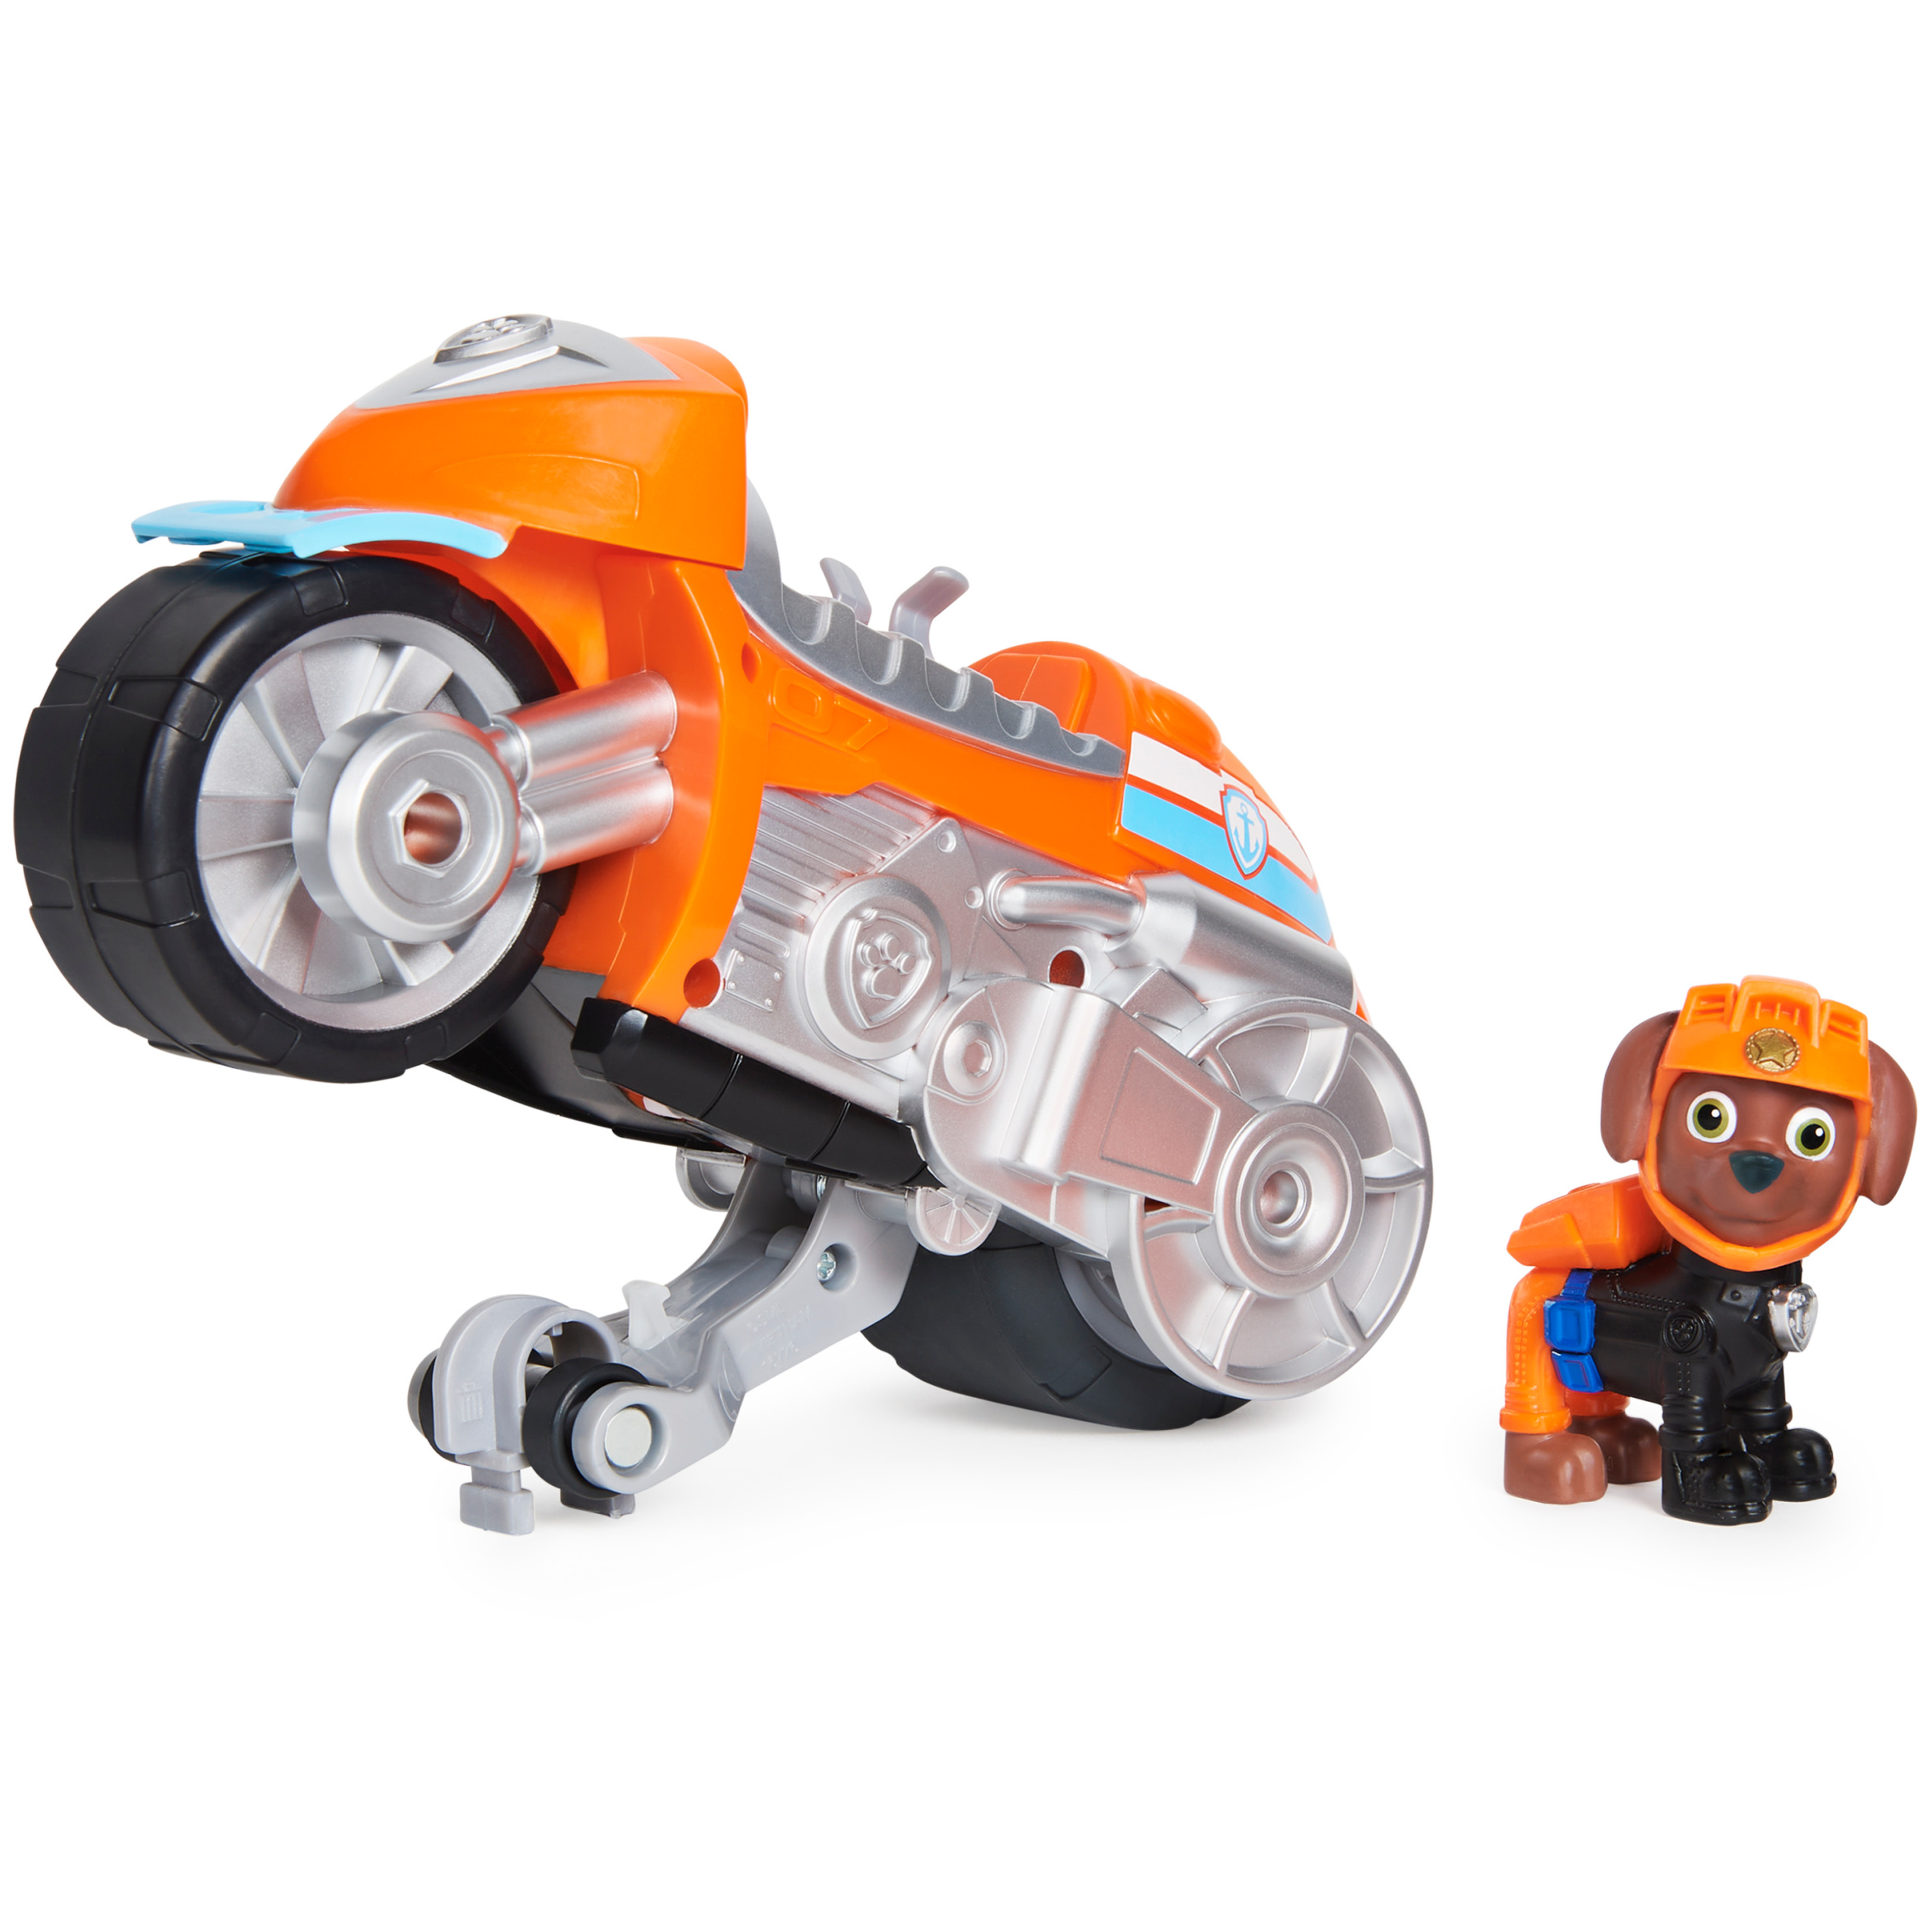 PAW Patrol, Moto Pups Zuma’s Deluxe Pull Back Motorcycle Vehicle with Wheelie Feature and Toy Figure - image 1 of 8